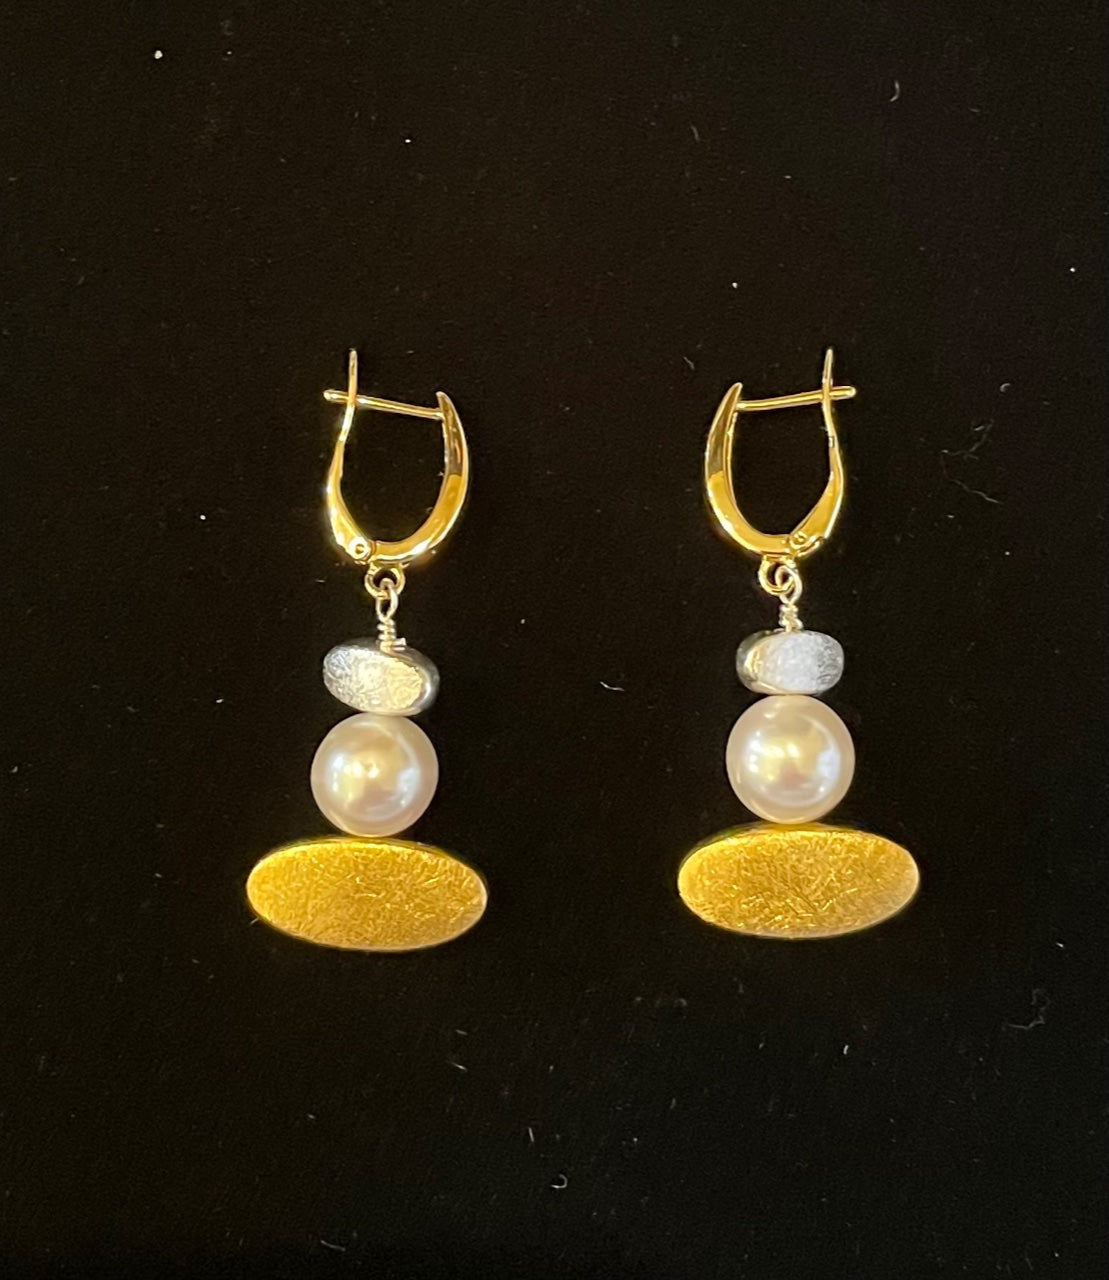 Earrings - Hanging 14k gold filled, sterling silver and 12mm white round pearl